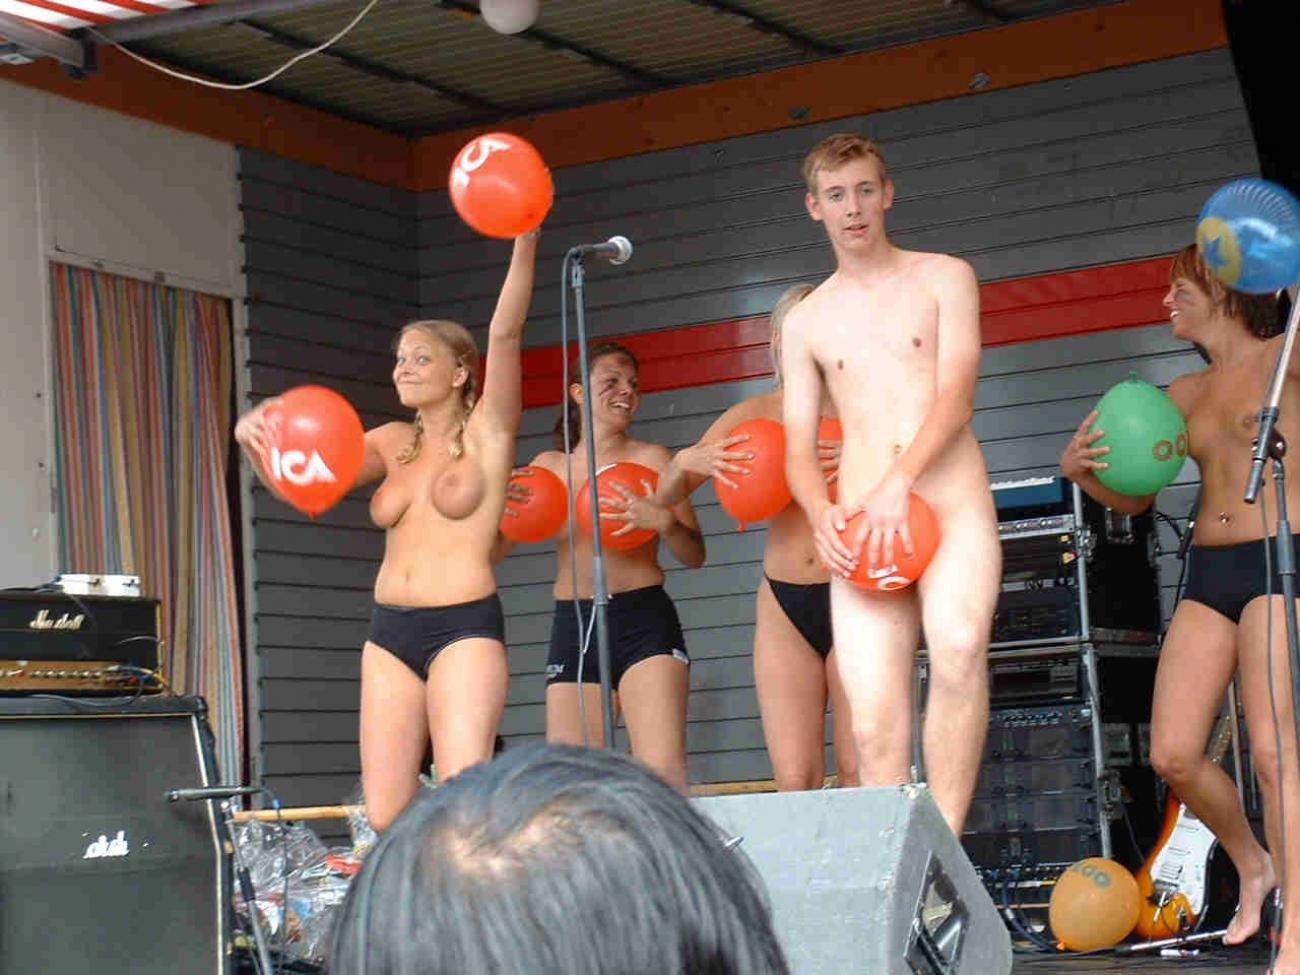 Outdoor event featuring trashy, naked girls on stage #77134028